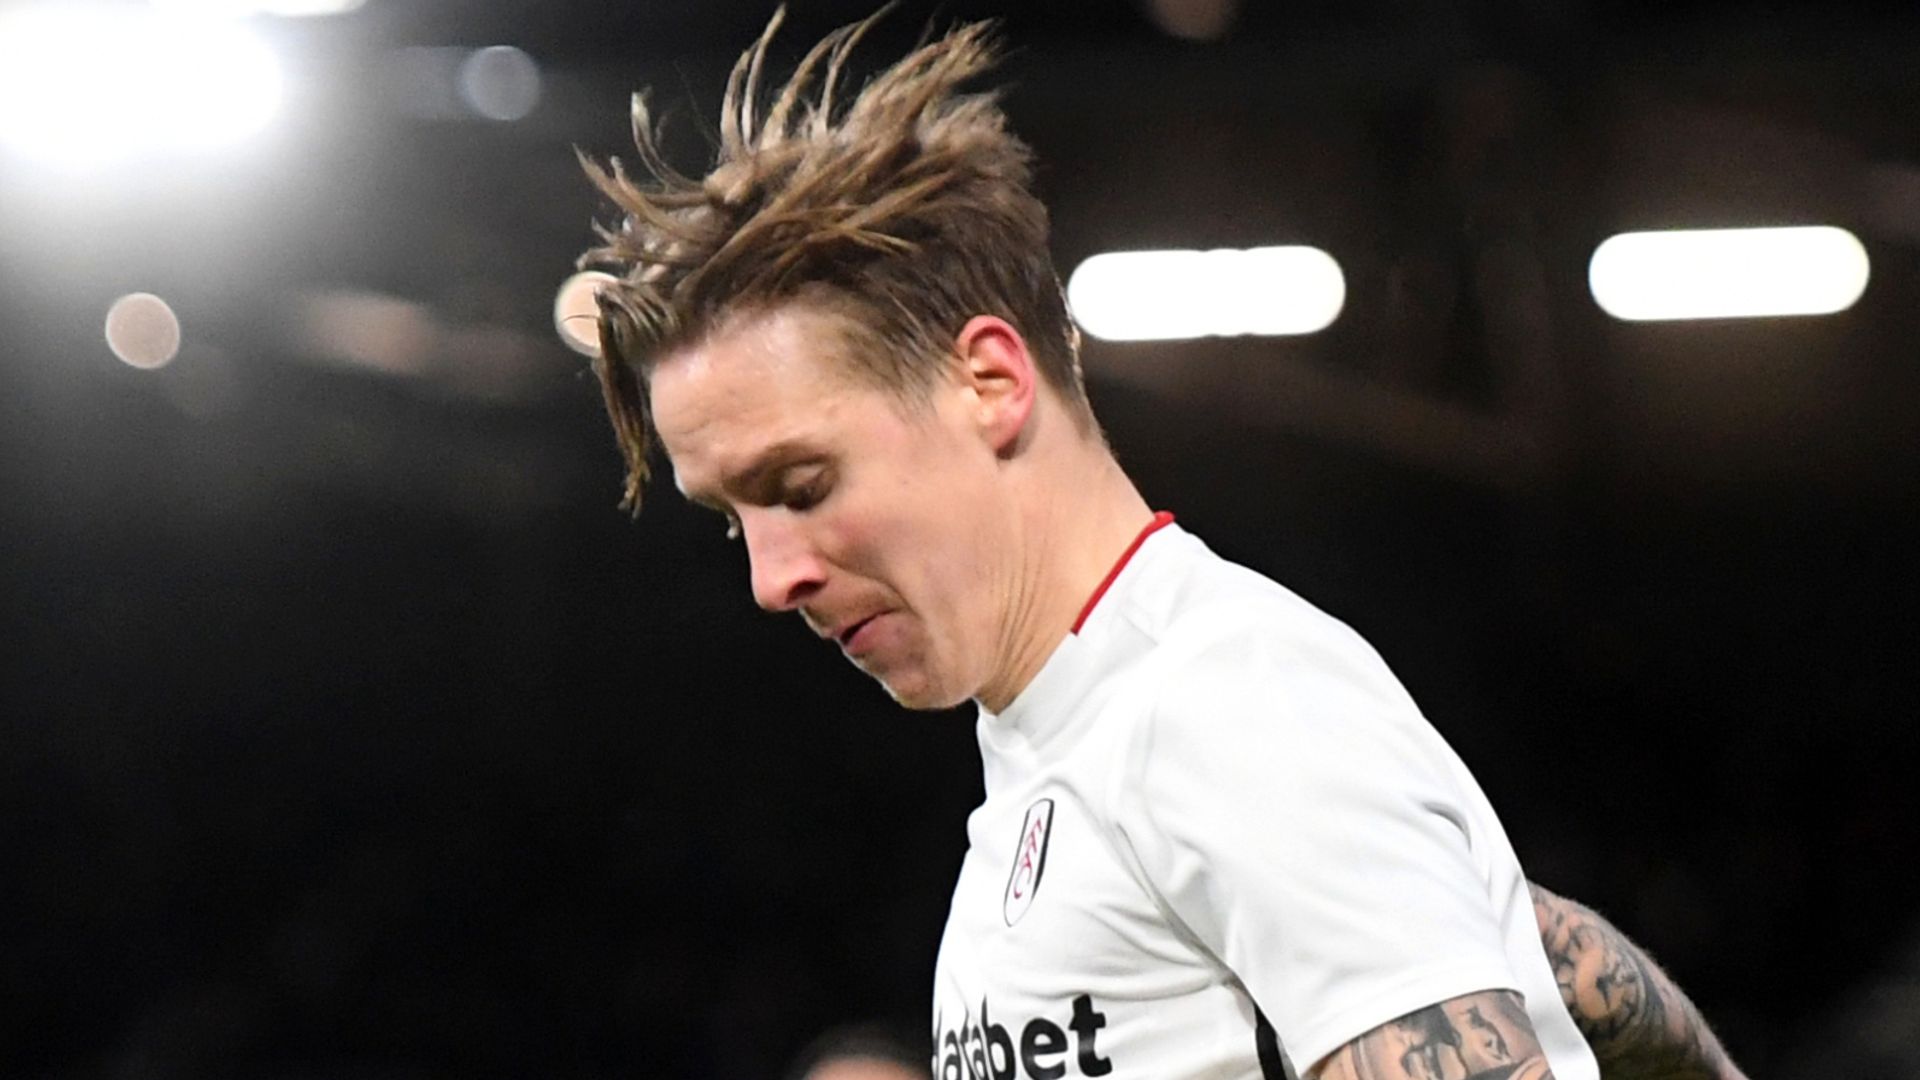 Fulham open to offers for Johansen, Seri, Le Marchand